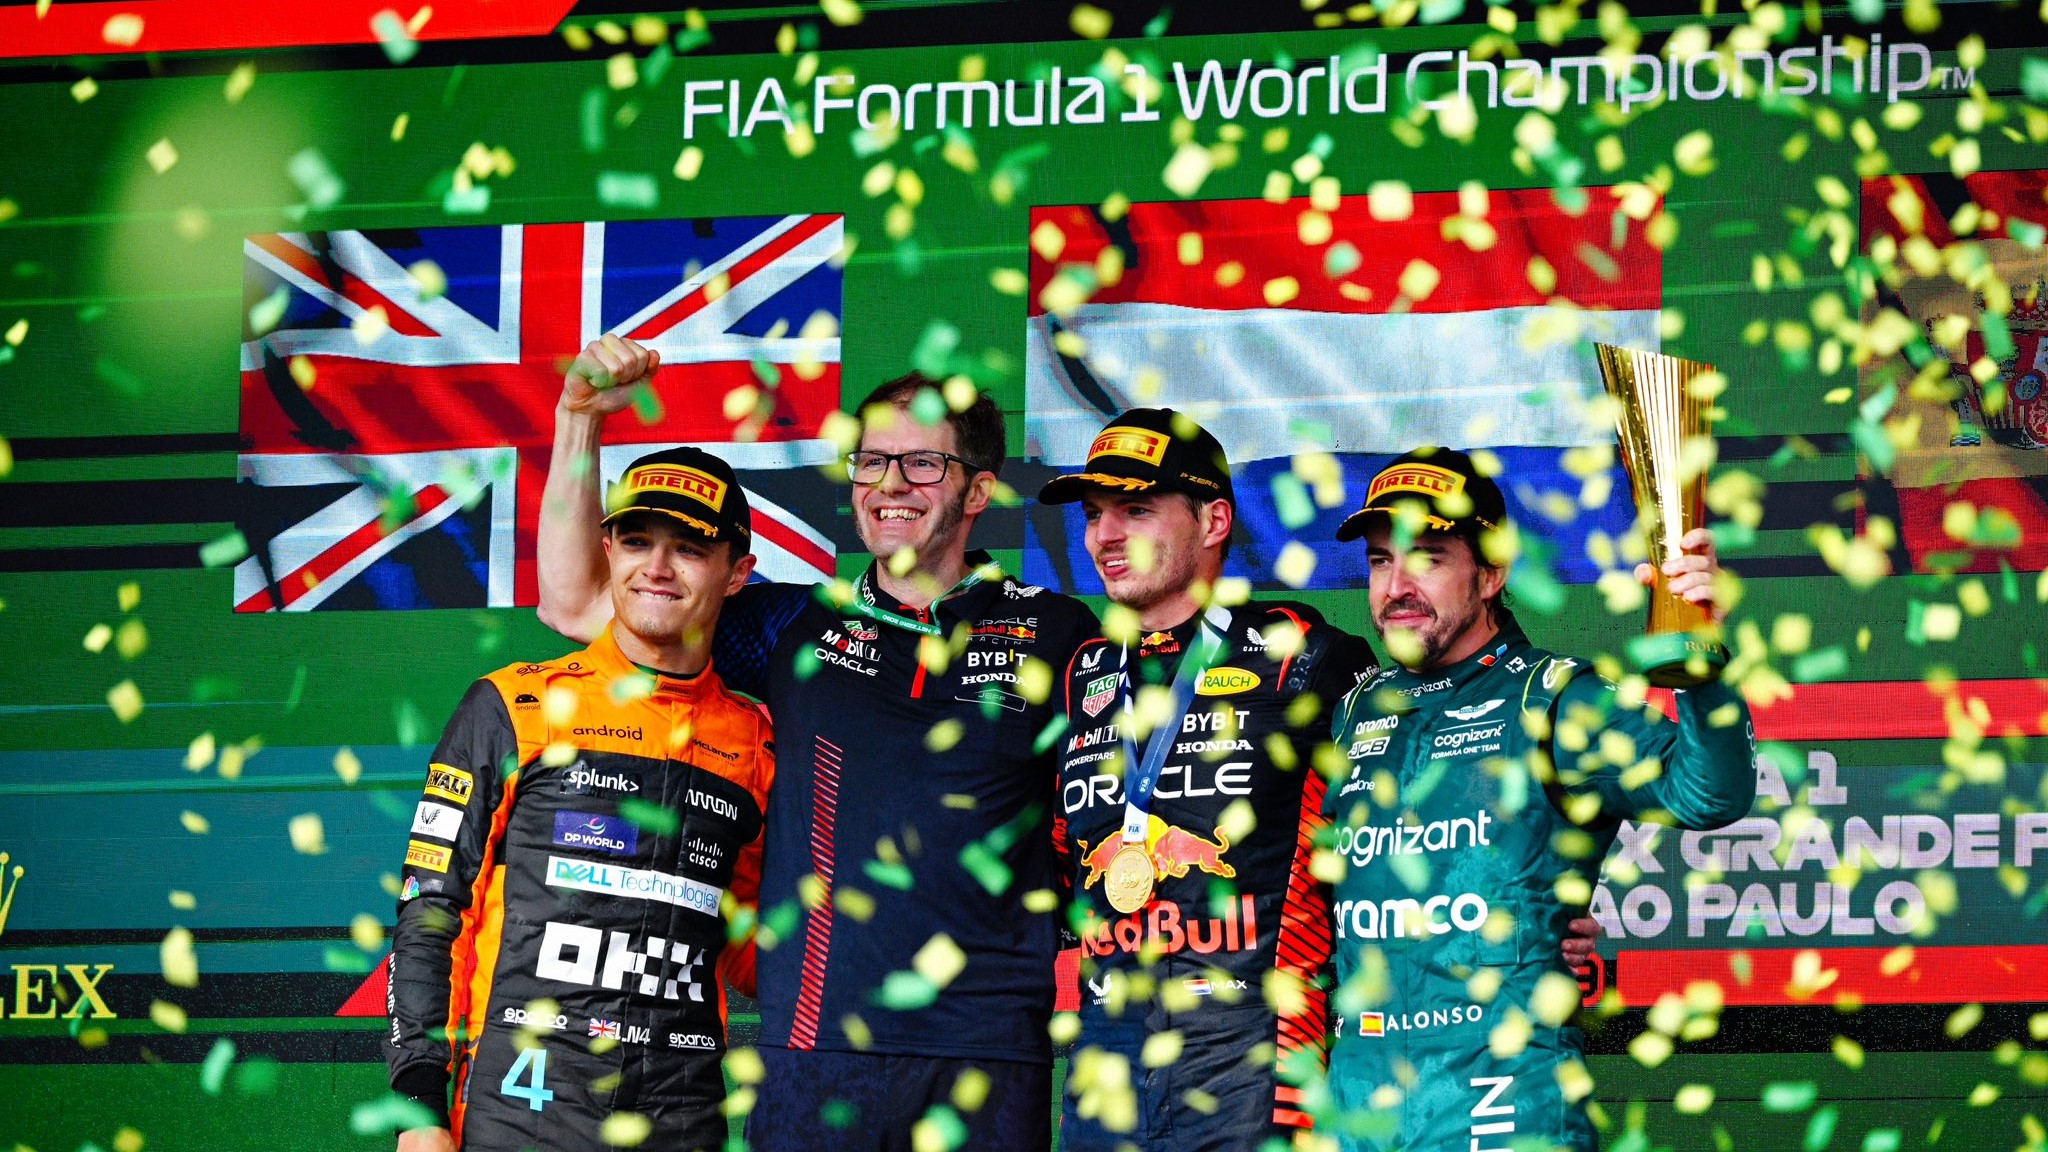 Brazil GP podium welcomed back Fernando Alonso who held off a charging Checo Perez for P3 (Image Credit: Oracle Red Bull Racing)